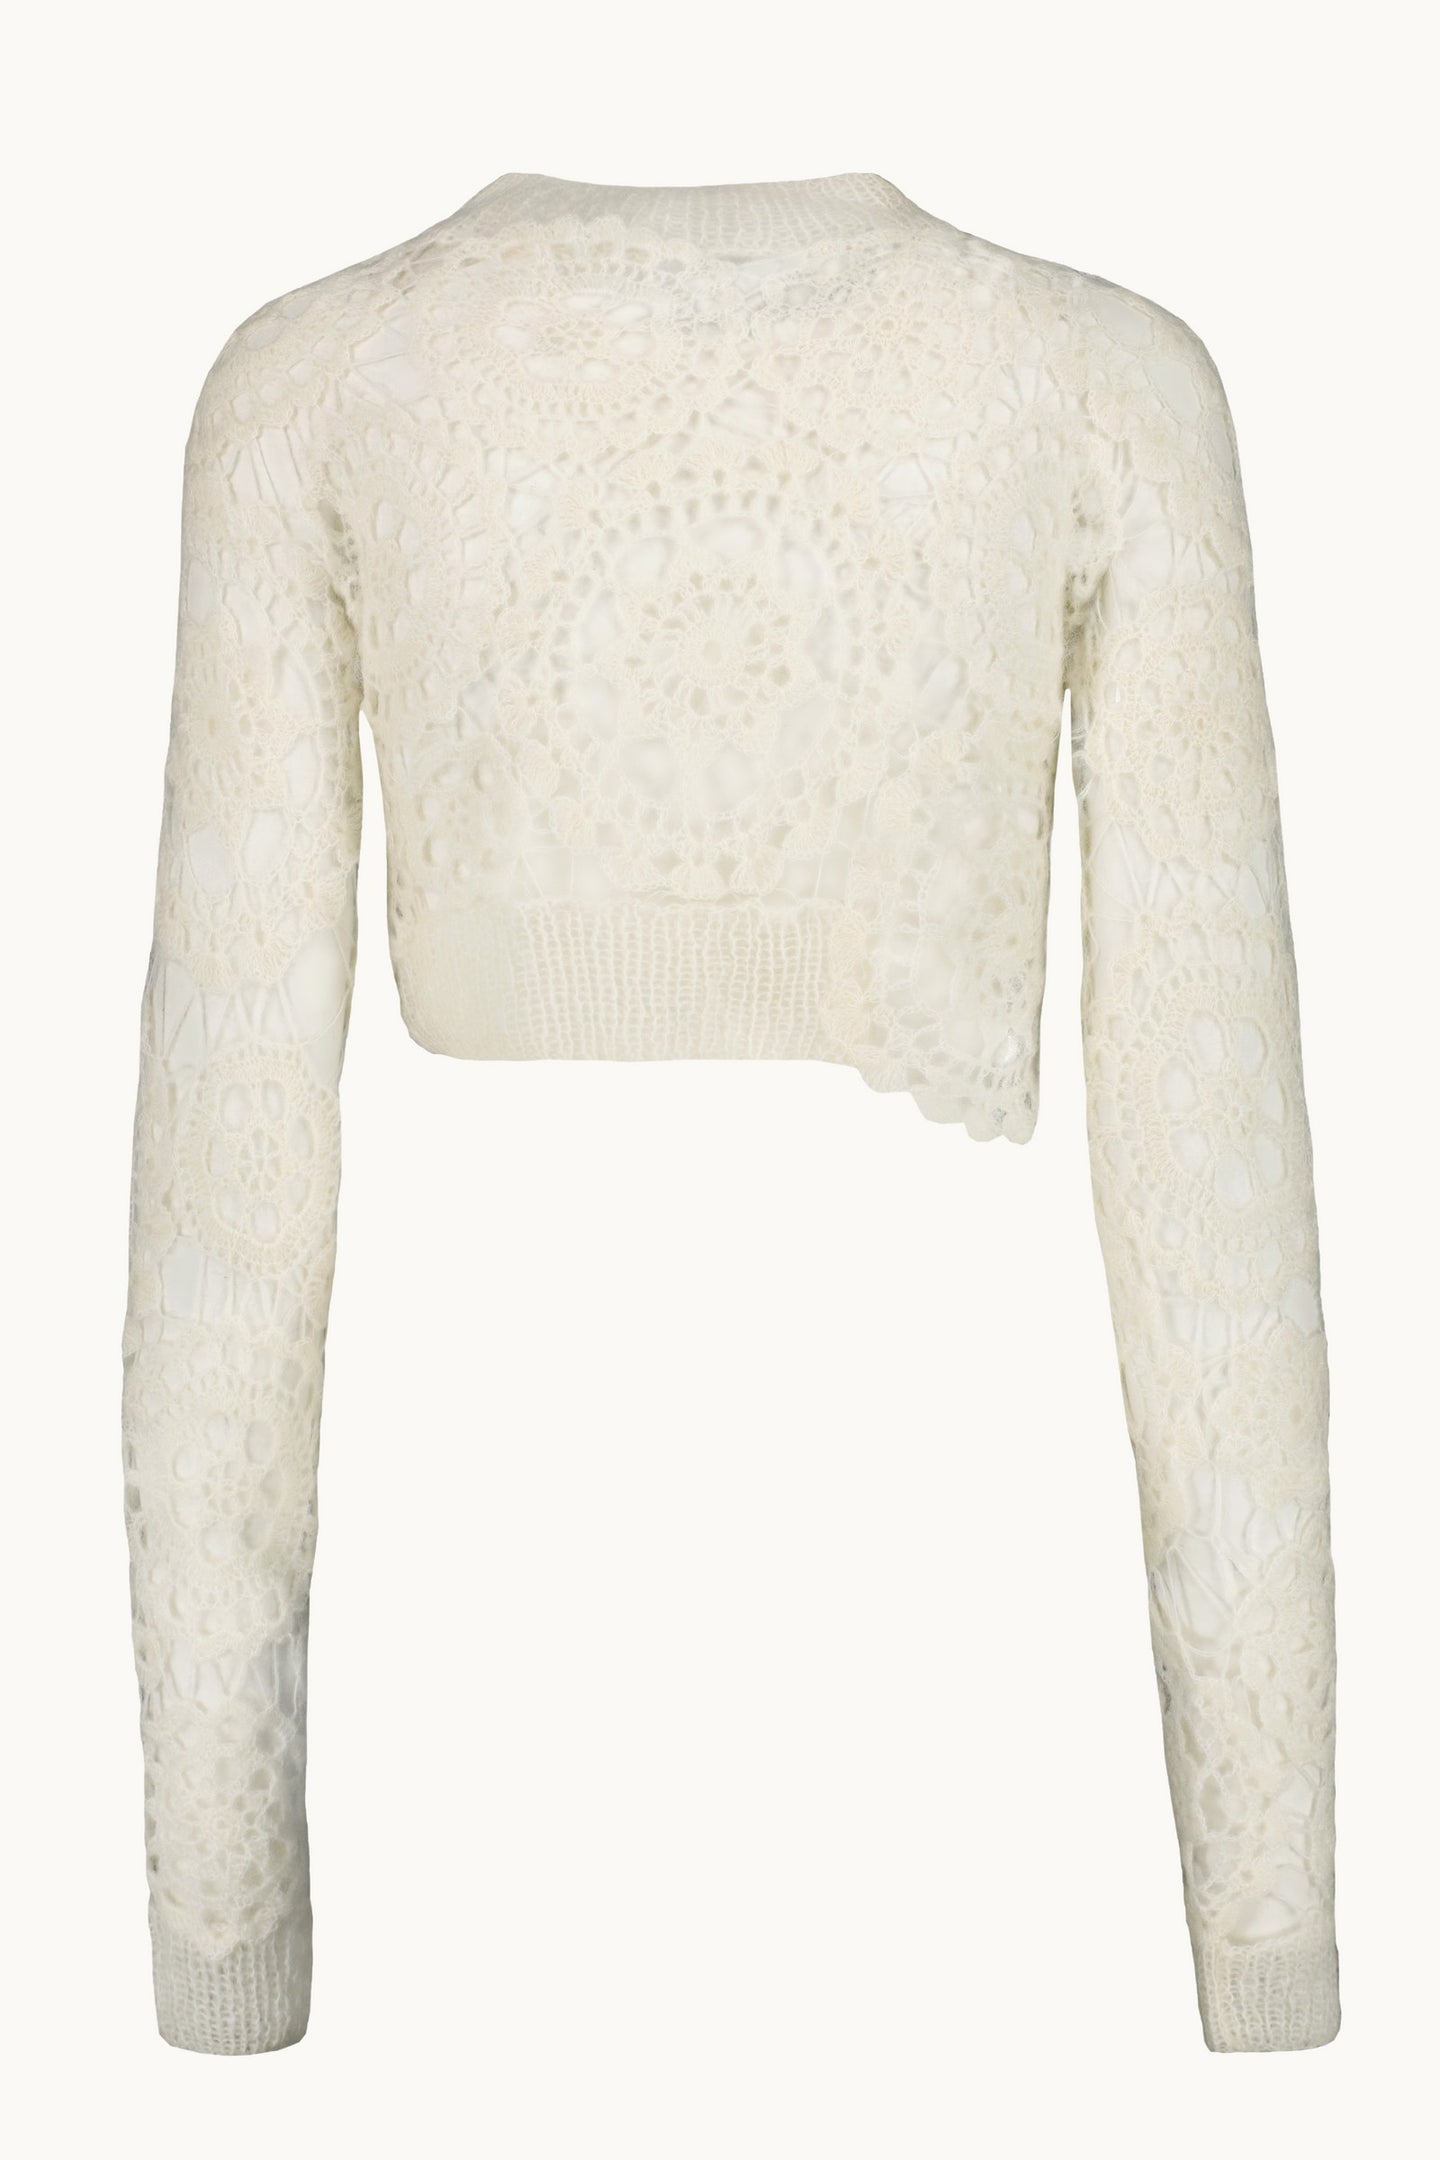 Élonor ivory sweater back view